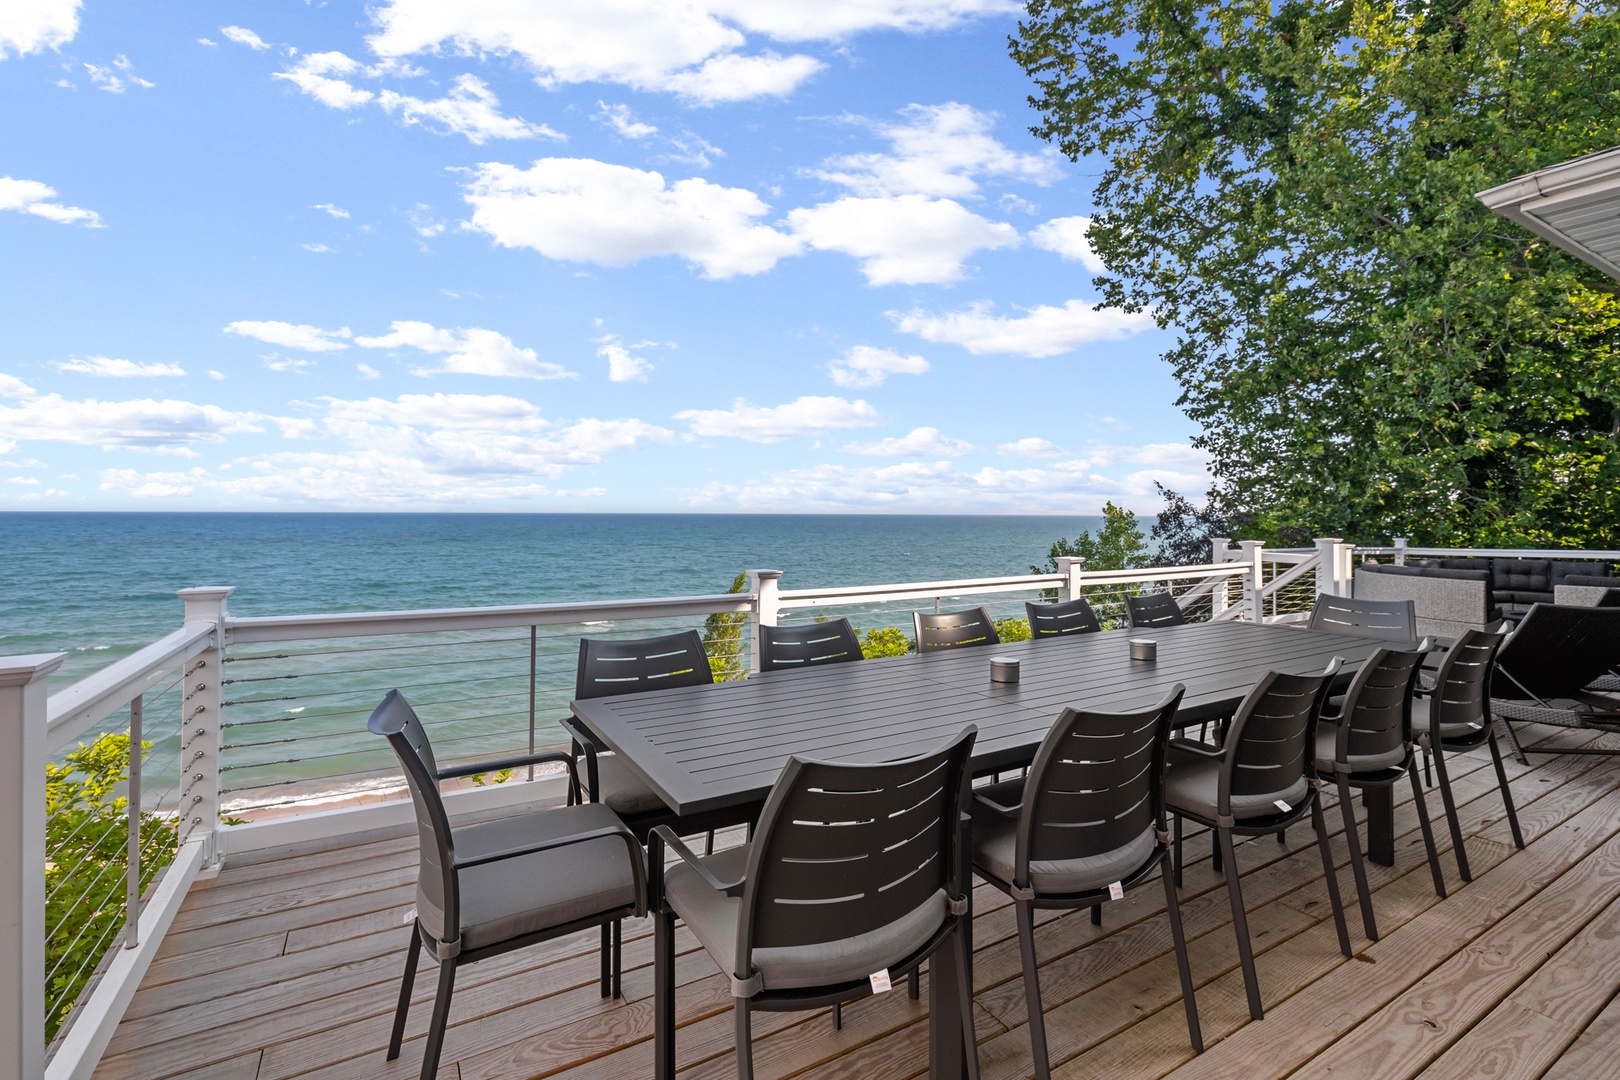 The dining options extend outside where there is waterfront seating for 10 on the deck.